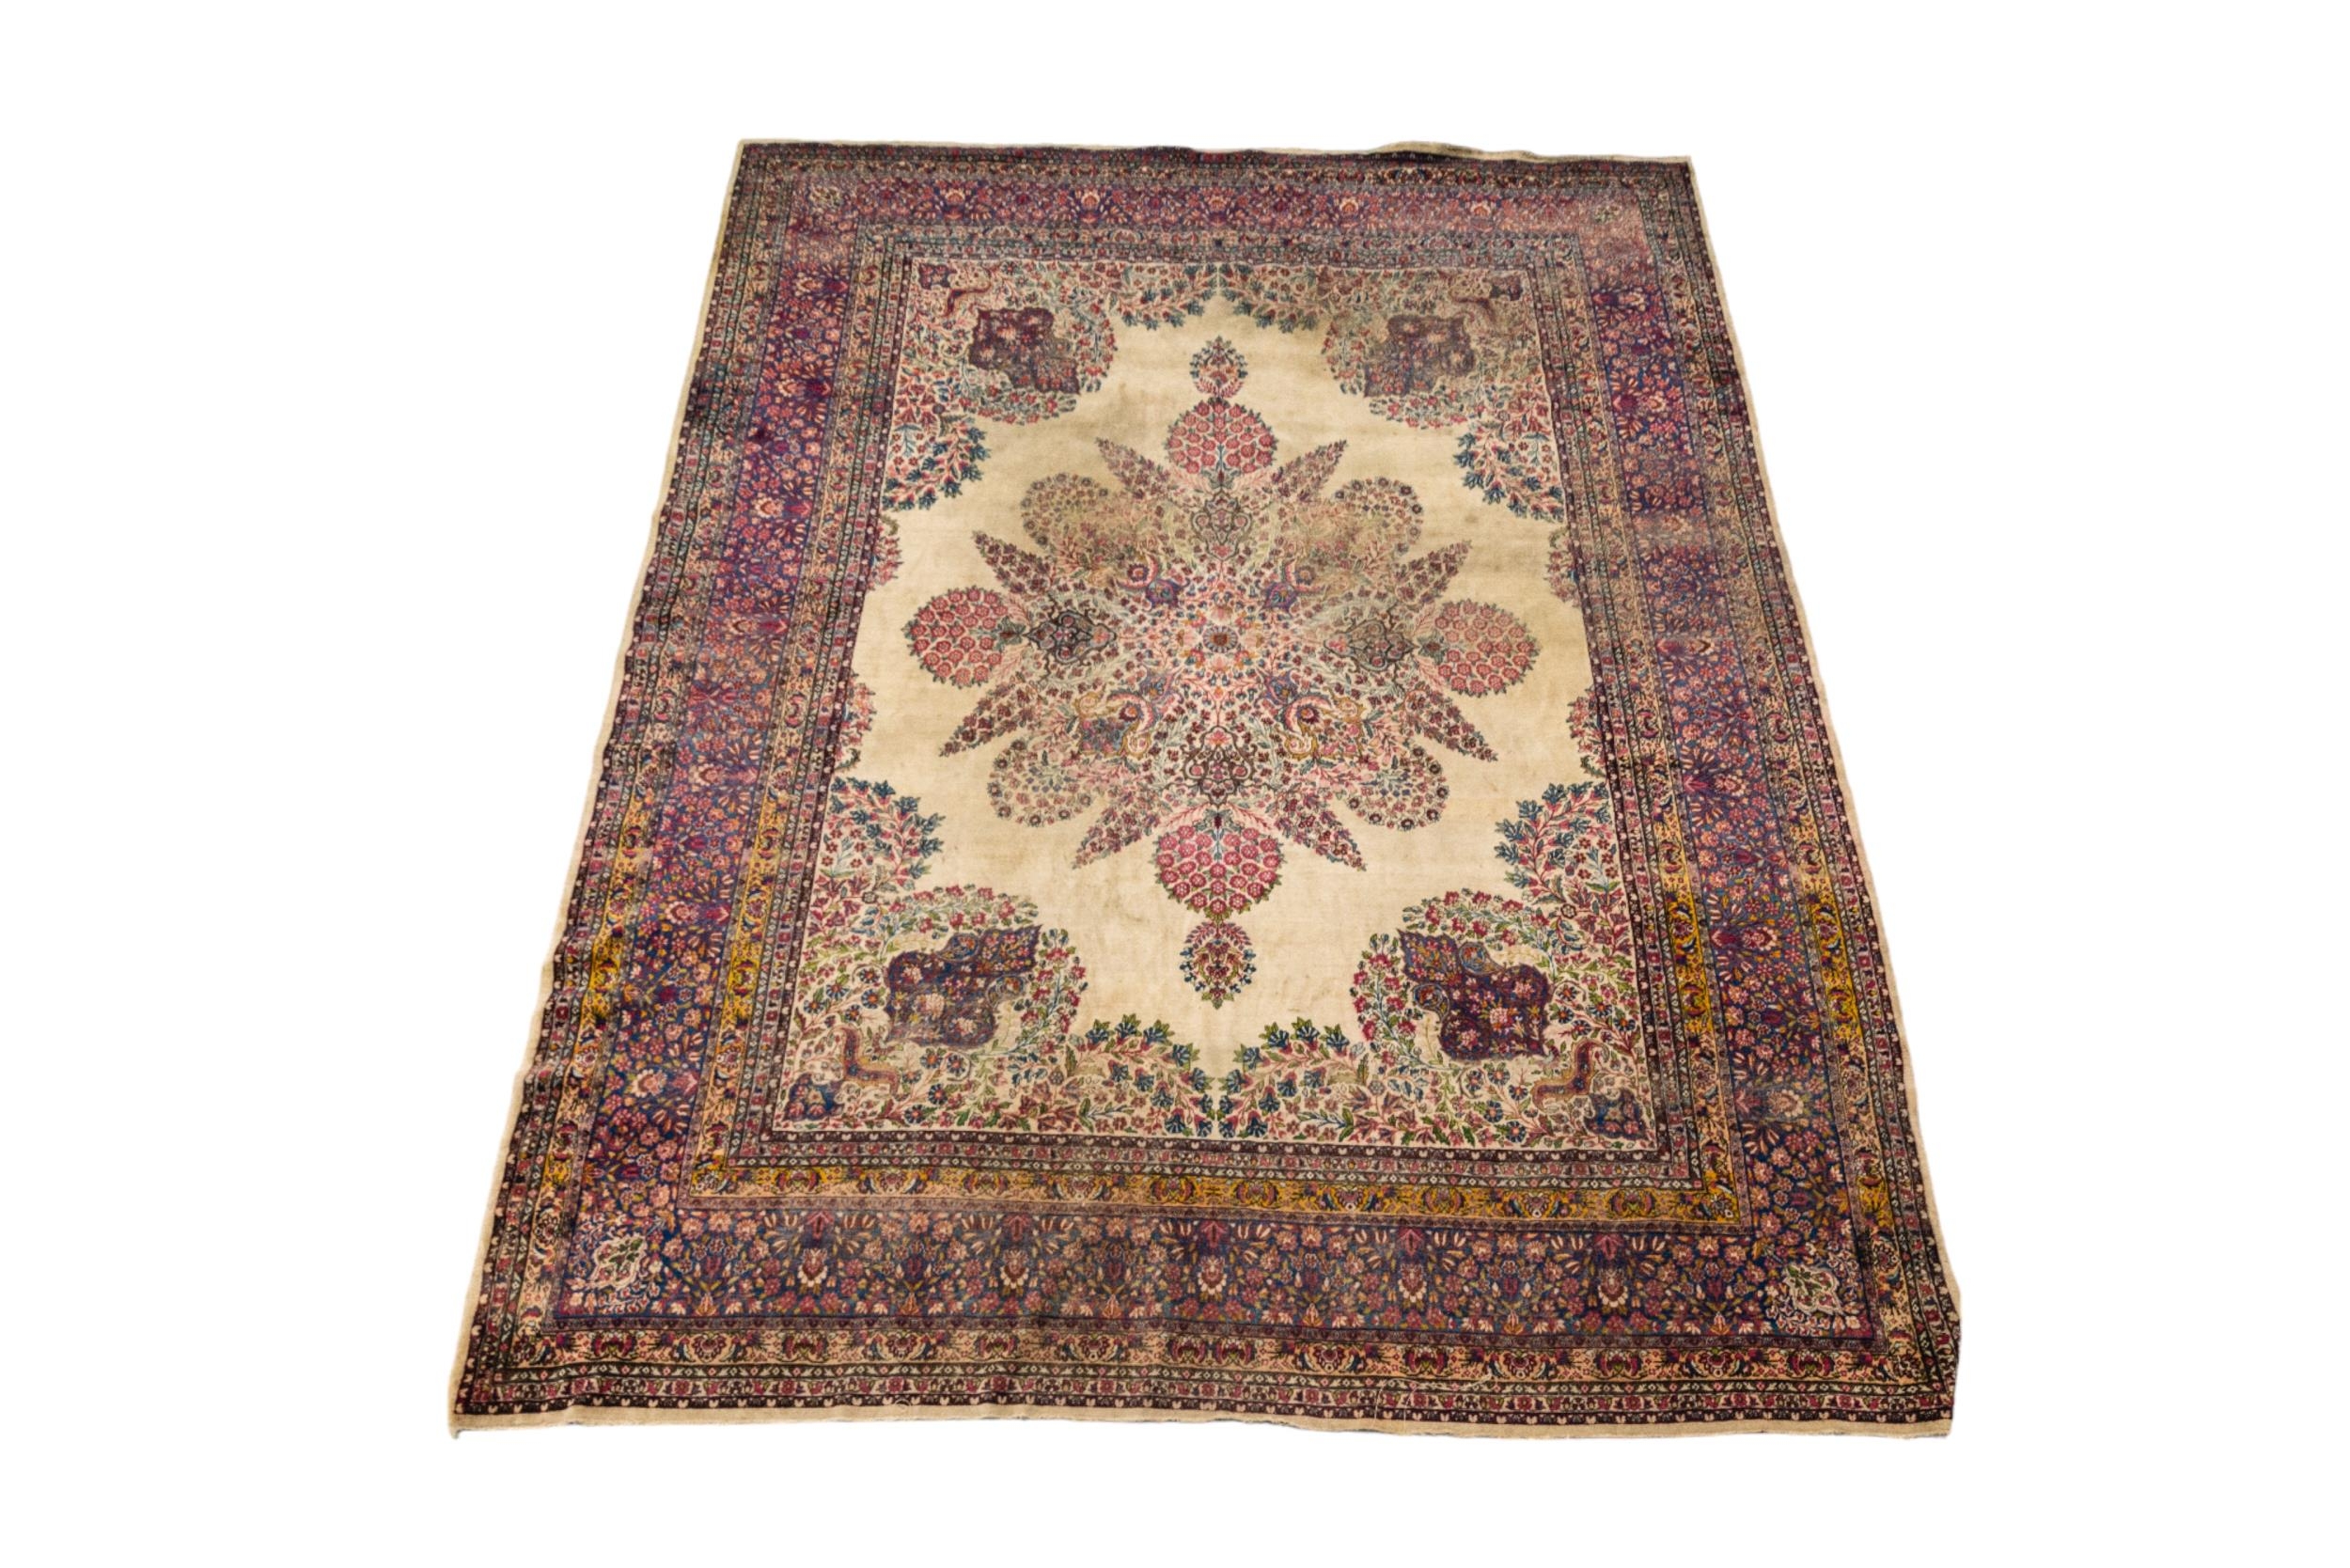 A HAND KNOTTED PERSIAN CITY RUG, EARLY 20TH CENTURY, PROBABLY KIRMAN, exceptional quality, wool. - Image 2 of 3